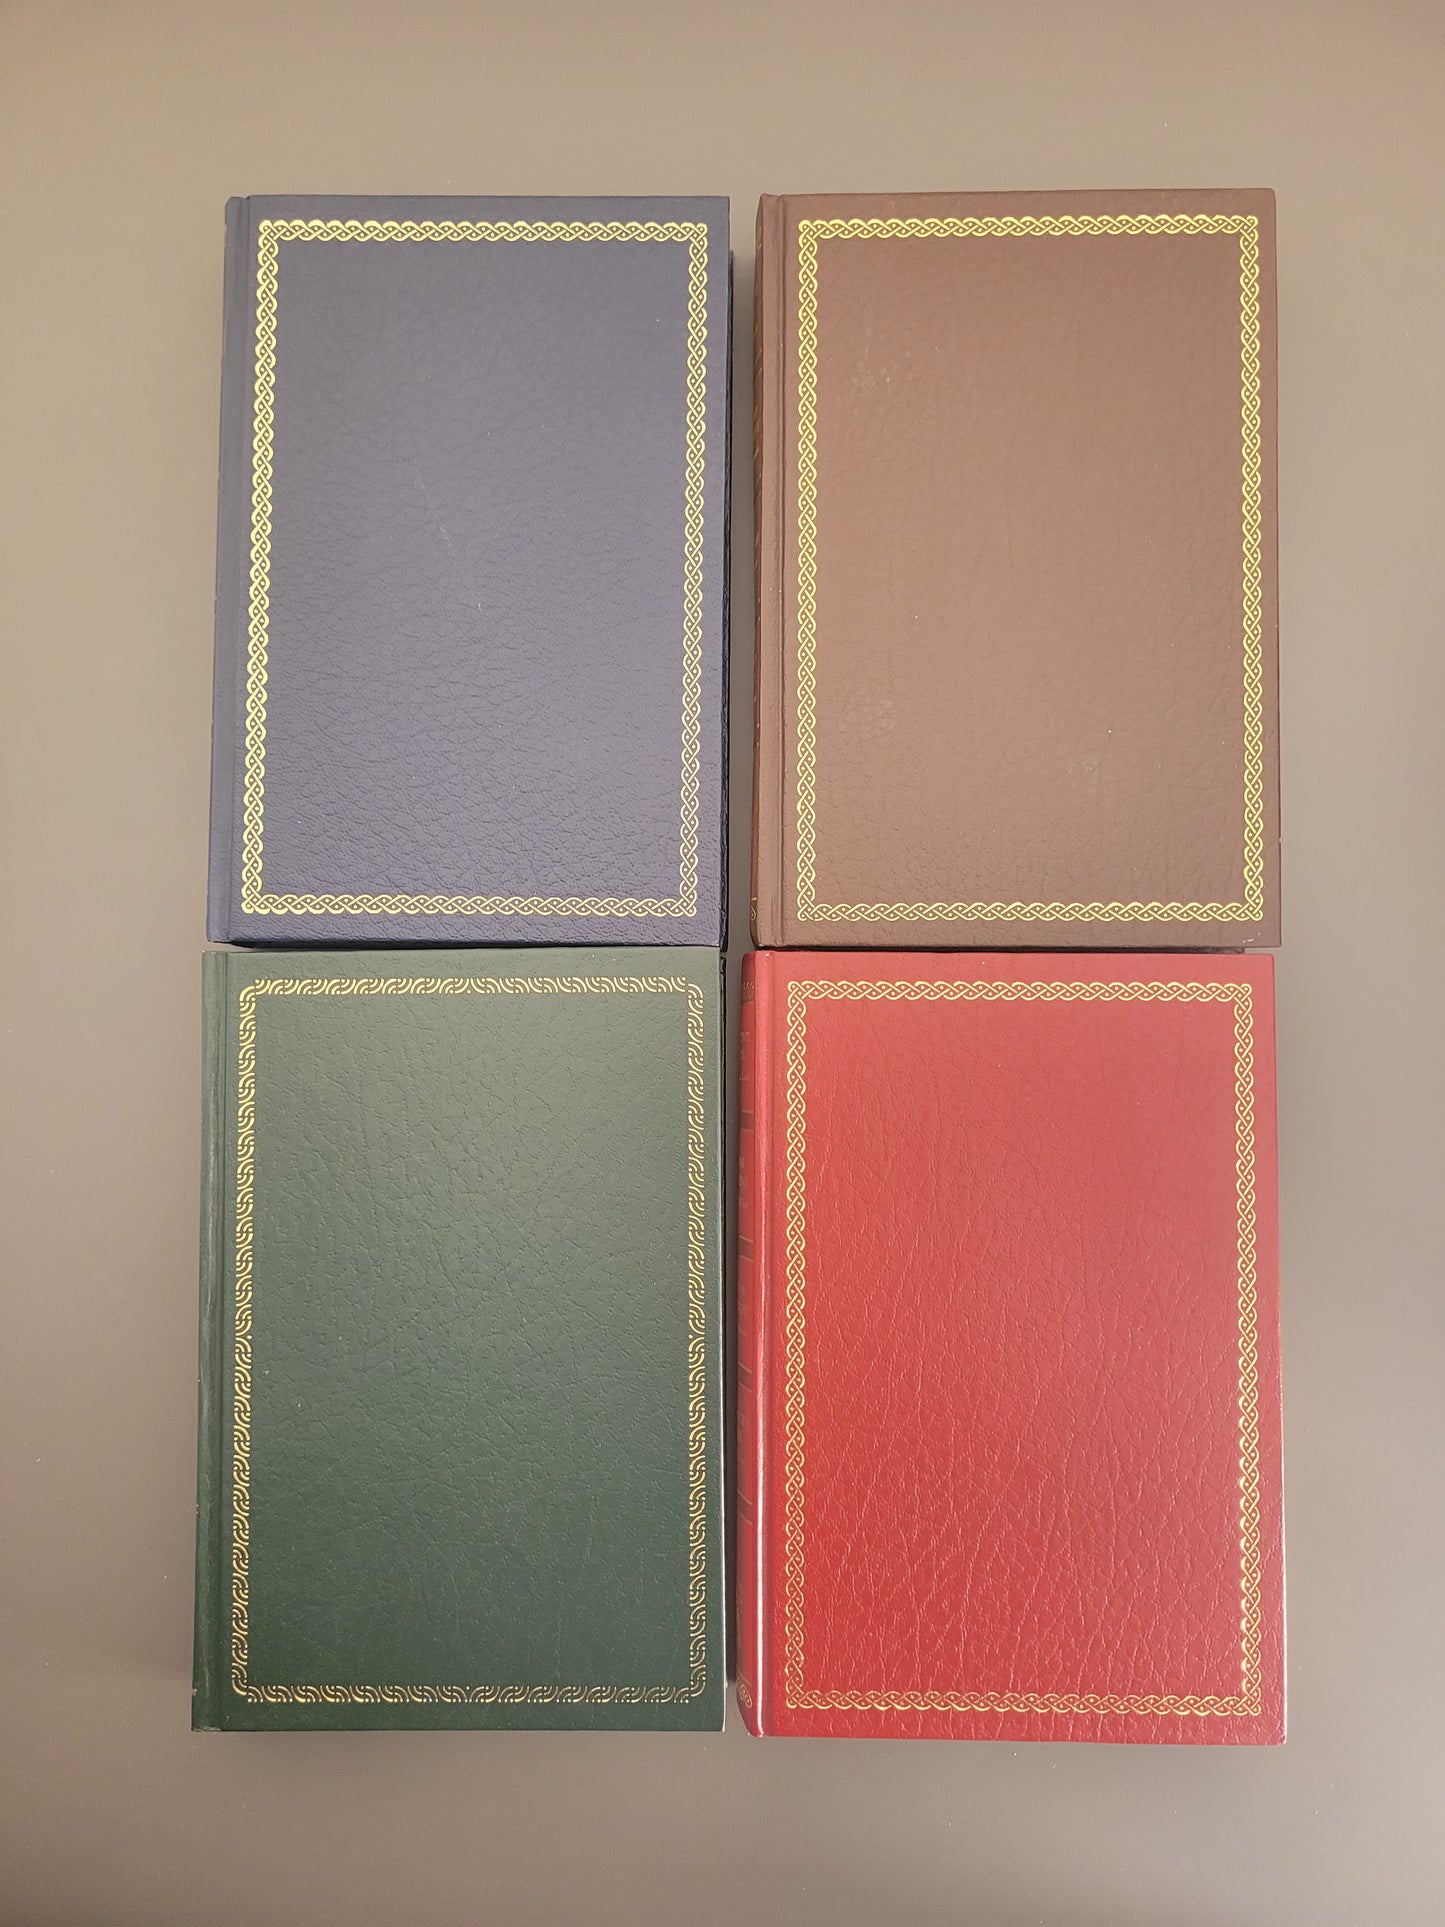 A picture of 4 hardback books - one blue, one brown, one green and one red,